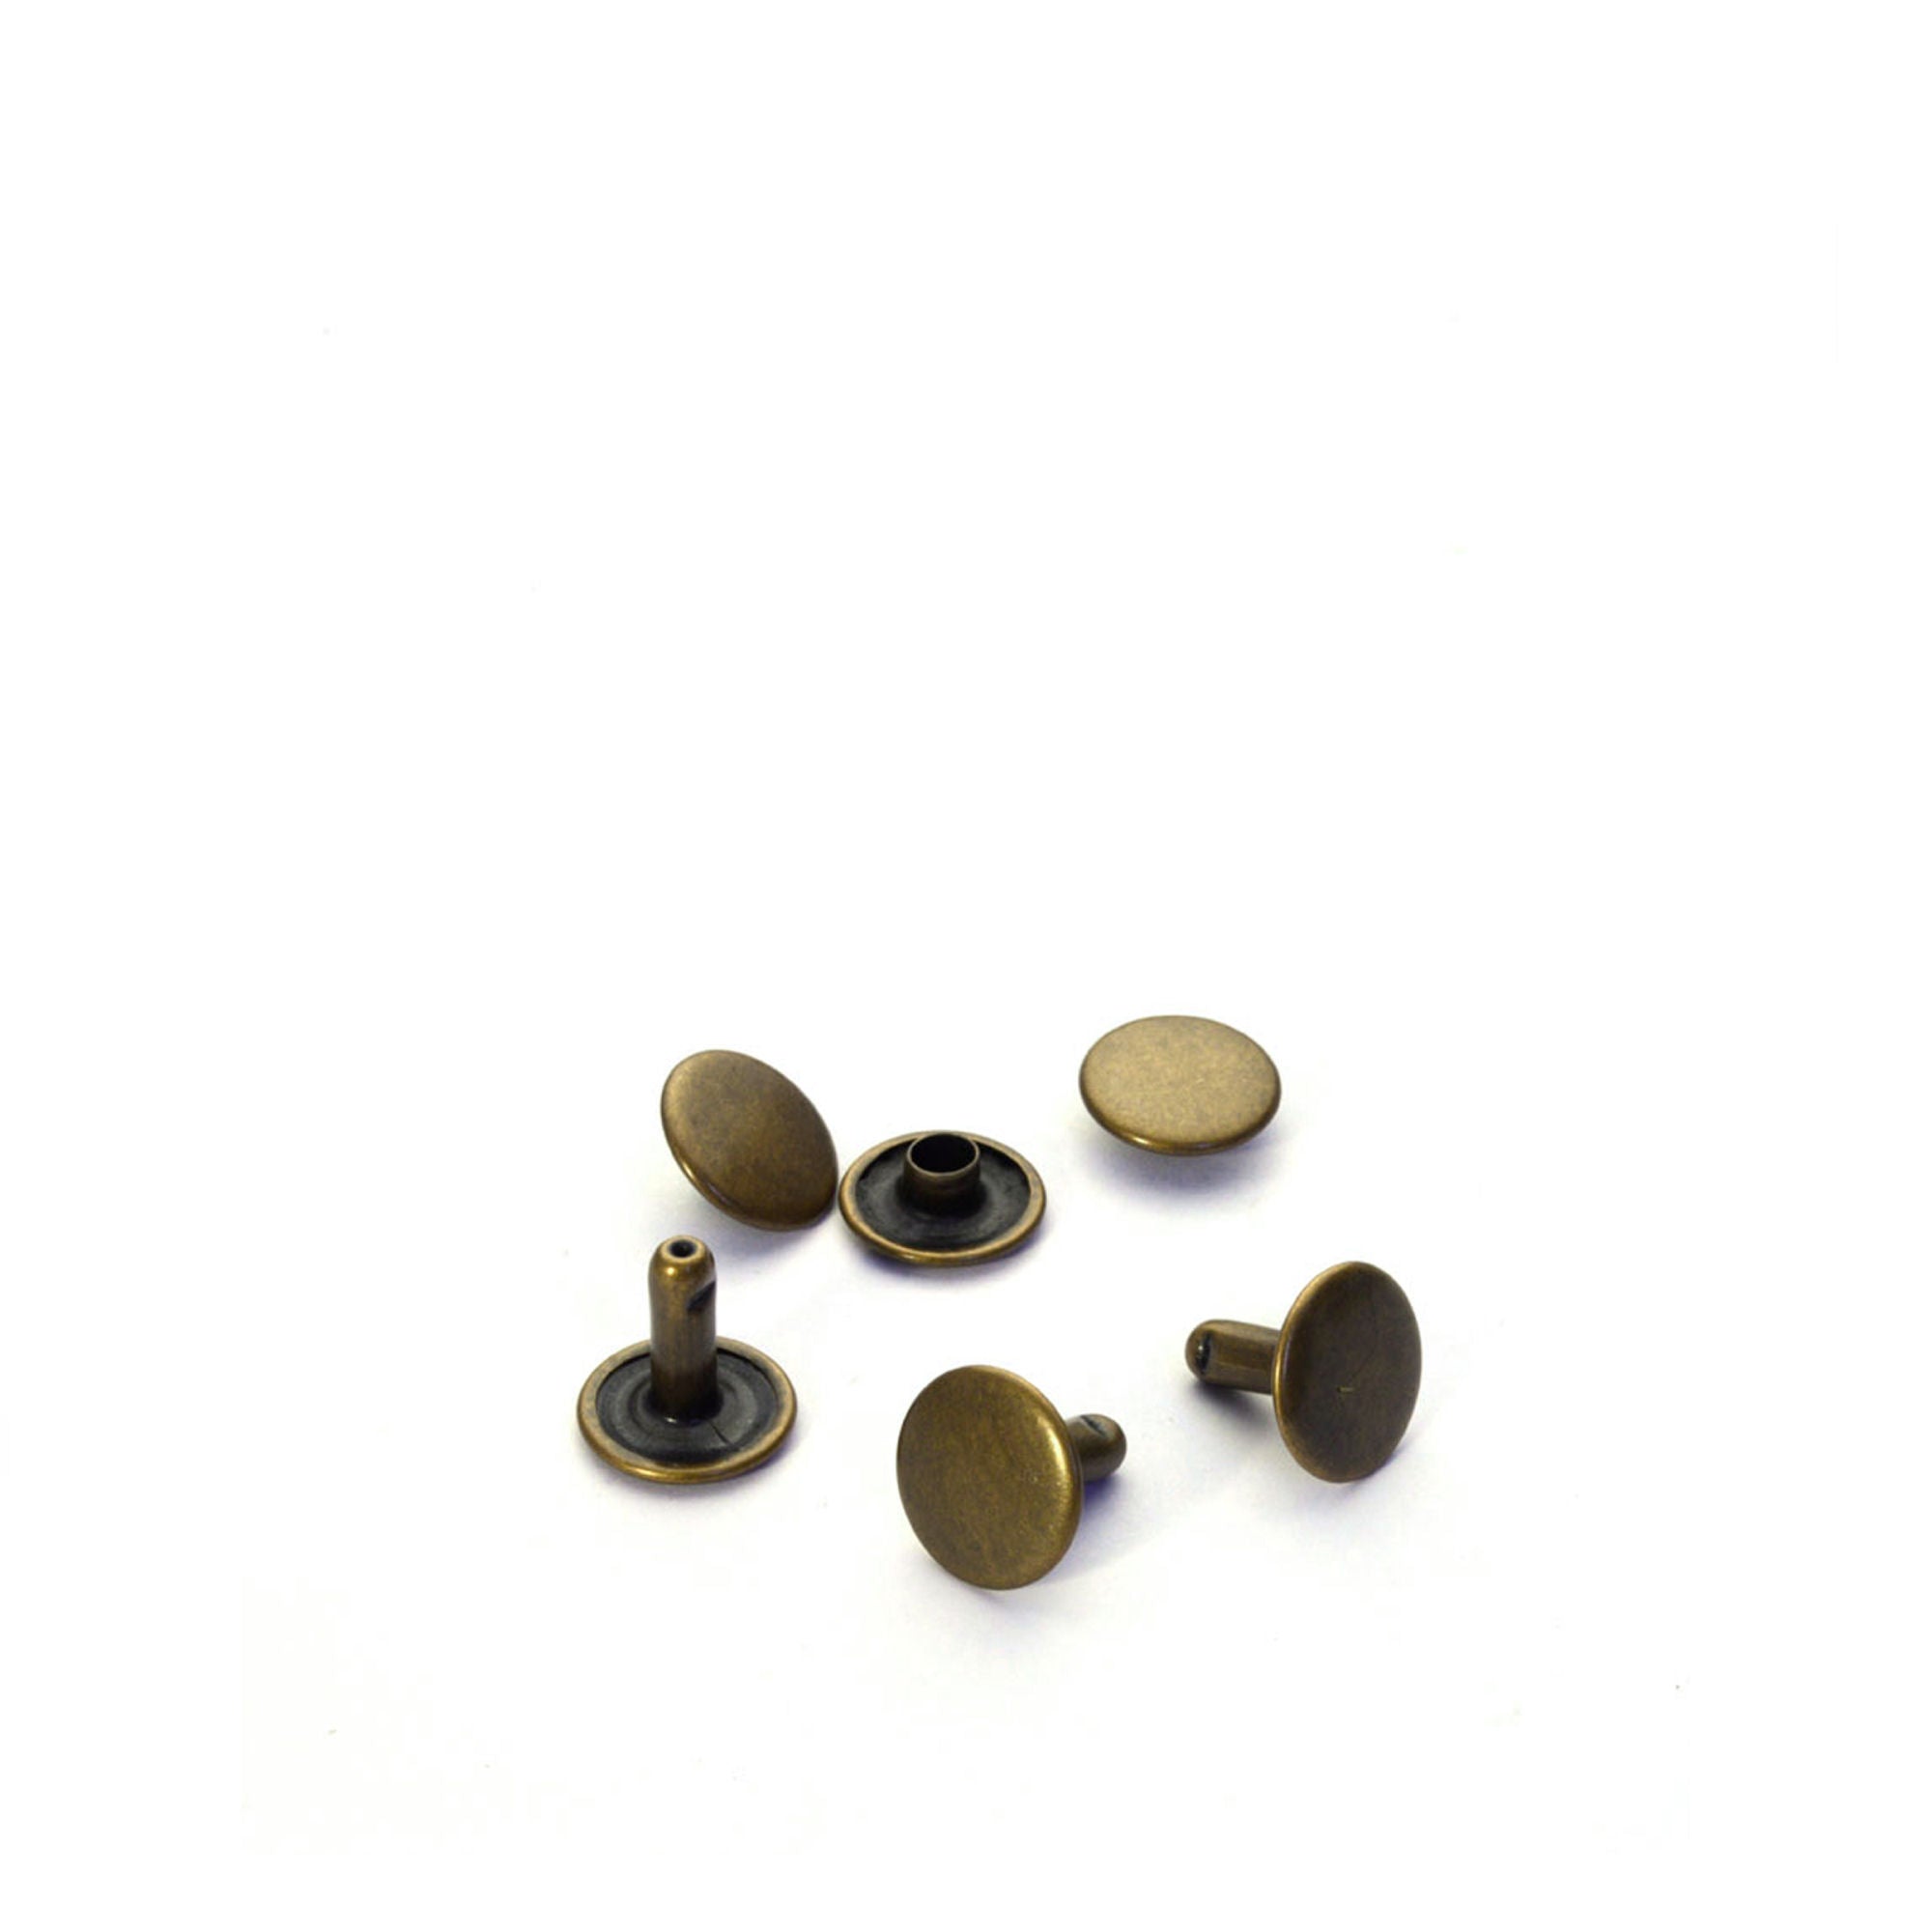 Wide Double Cap Rivets (Nickel Free) from Identity Leathercraft